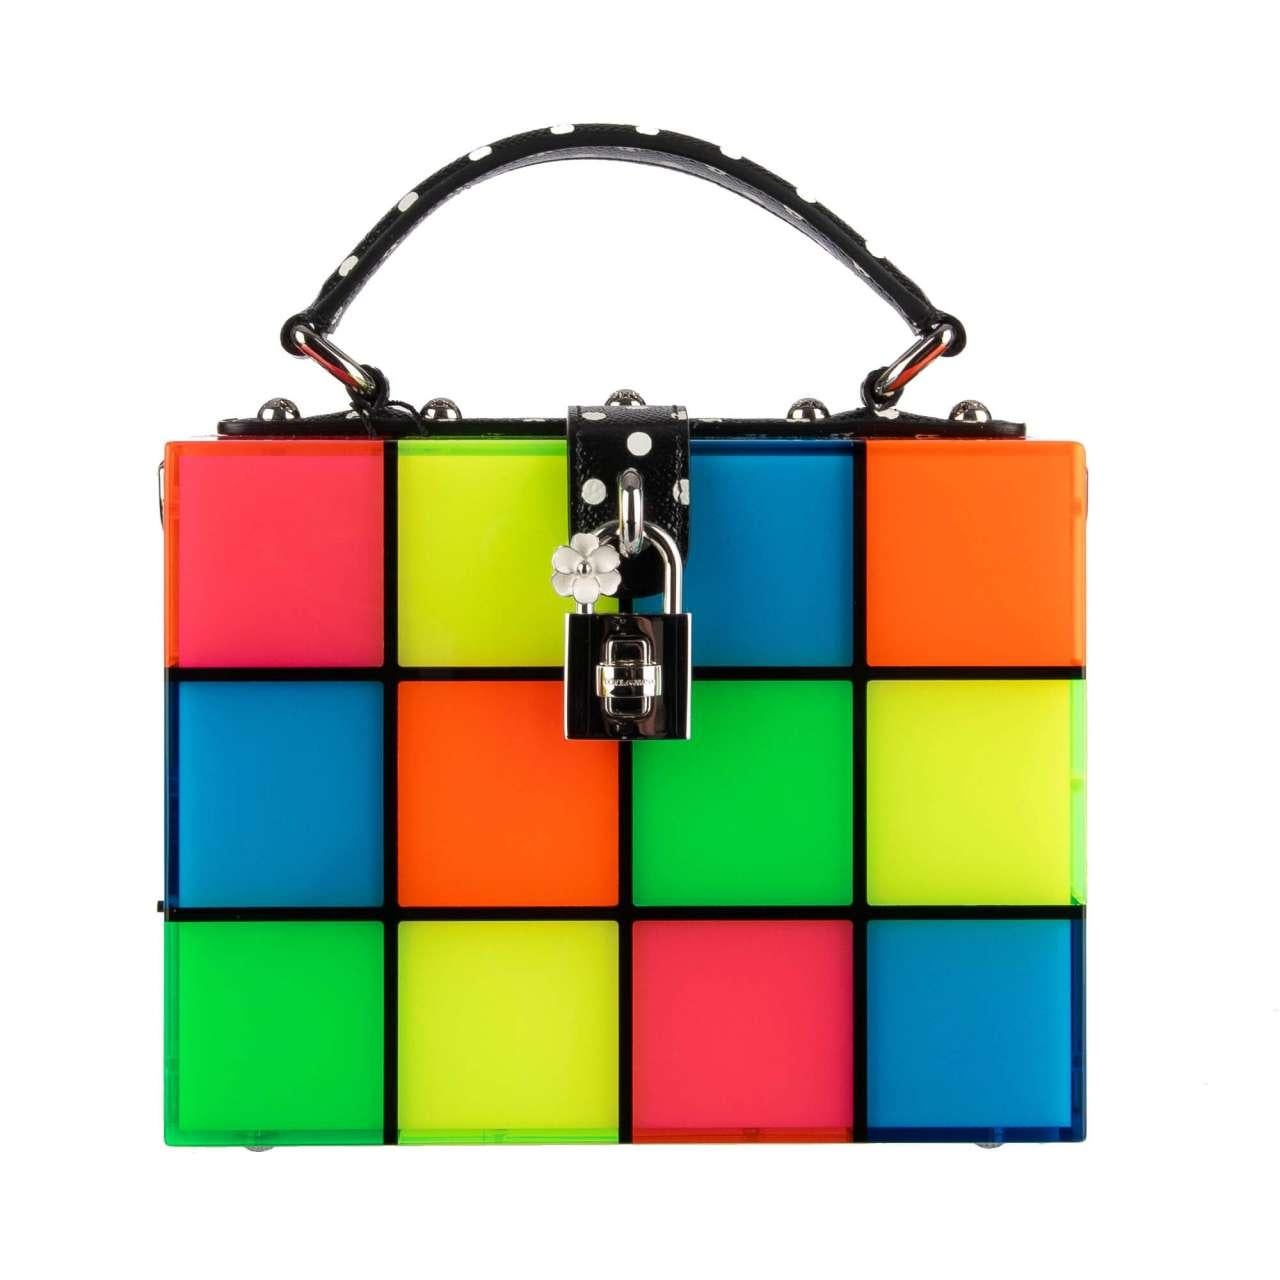 - Unique Plexiglas clutch / evening bag DOLCE BOX with square disco design, real running LED lights and decorative padlock by DOLCE & GABBANA - Running lights can be switched on and off with On / Off button - New with Tag, Authenticity Card and